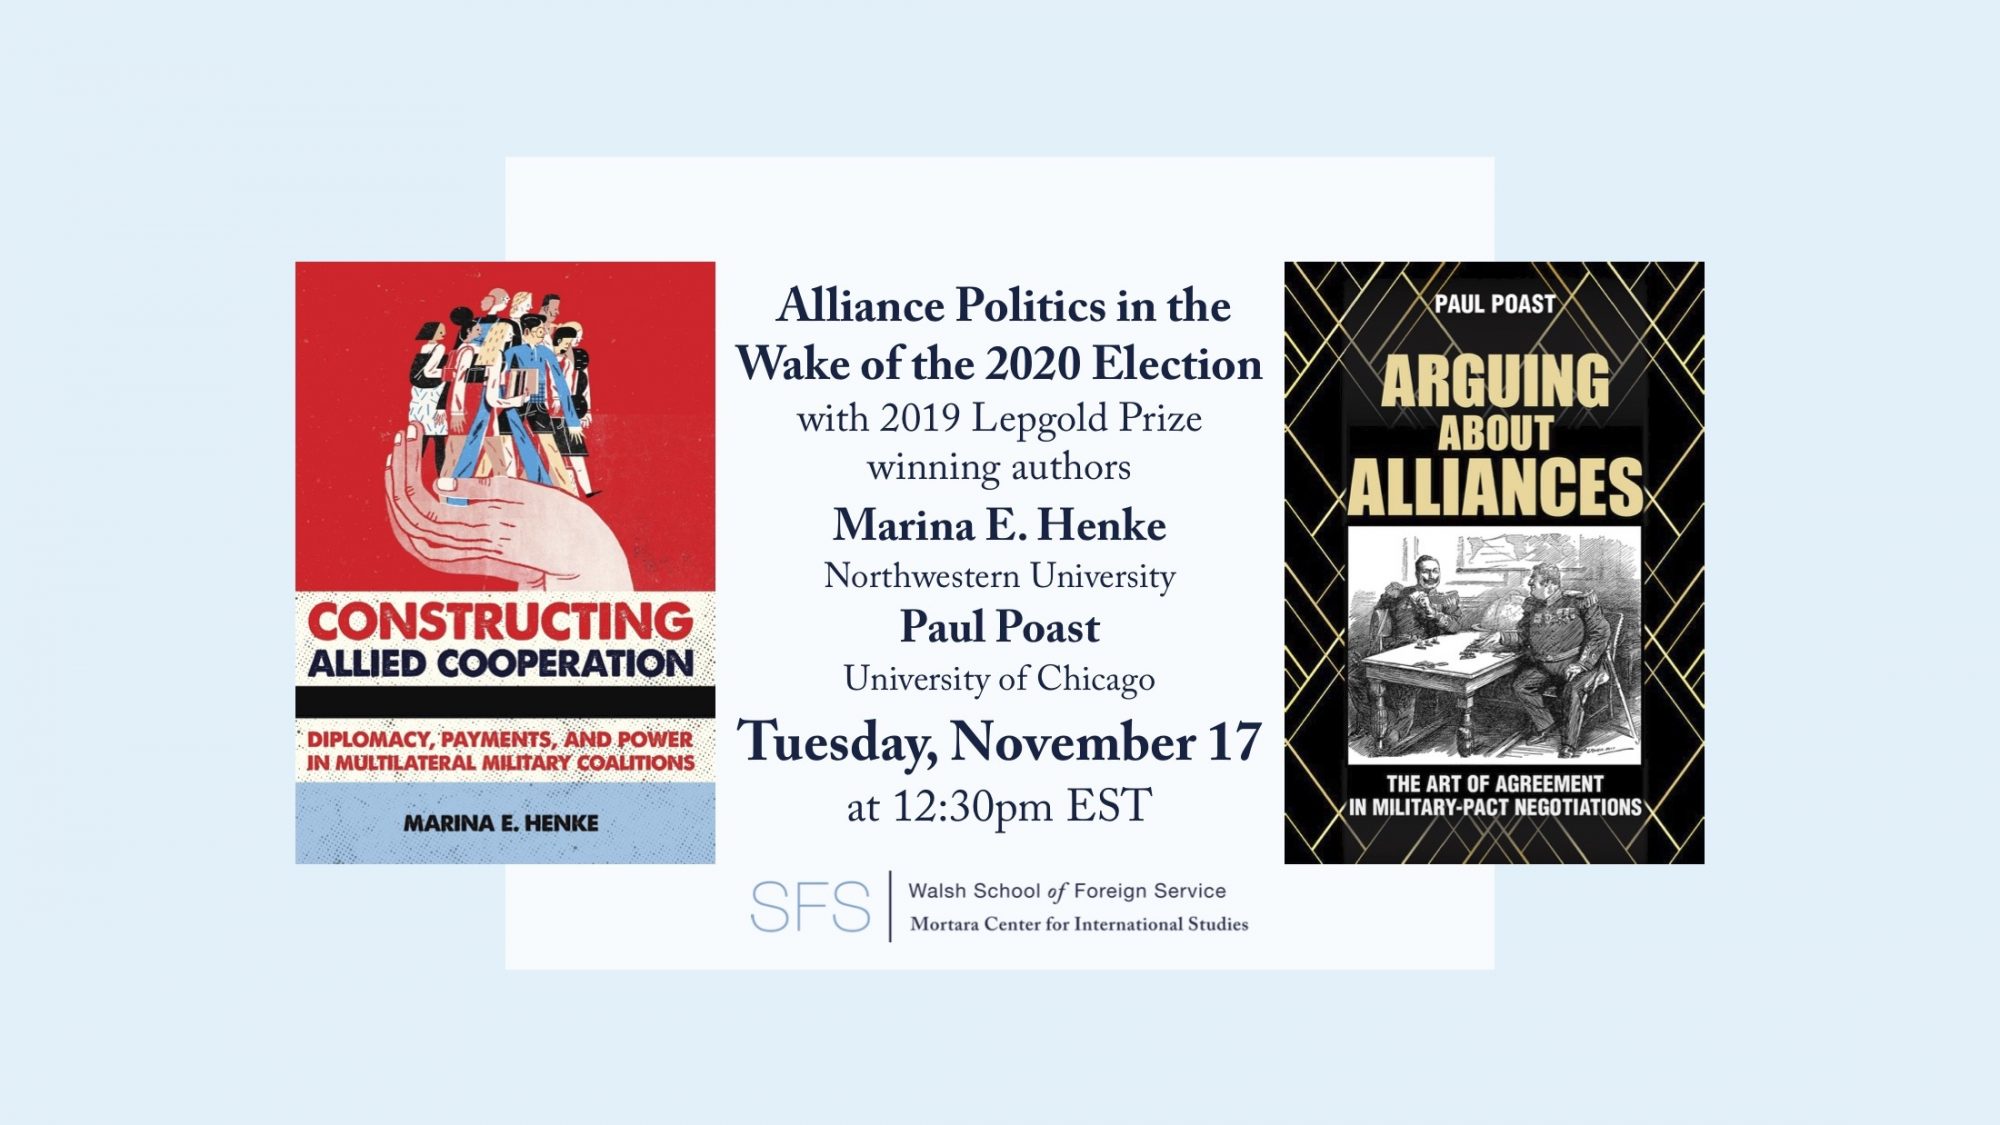 Alliance Politics in the Wake of the 2020 Election with 2019 Lepgold Prize winning authors Marina E. Henke of Northwestern University and Paul Poast of the University of Chicago on Tuesday November 17 at 12:30pm EST